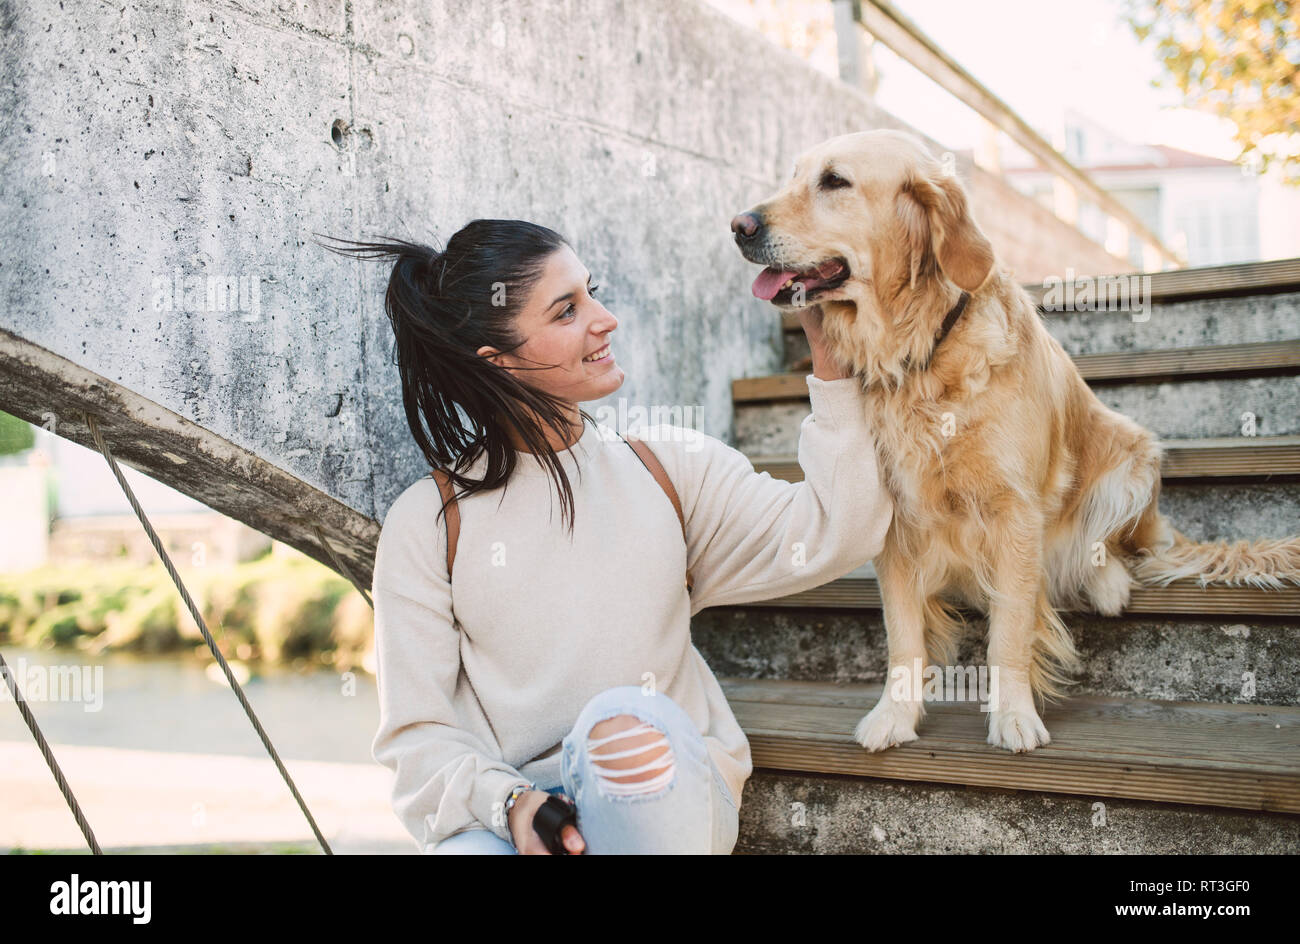 Smiling young woman stroking her Golden retriever dog on stairs outdoors Stock Photo